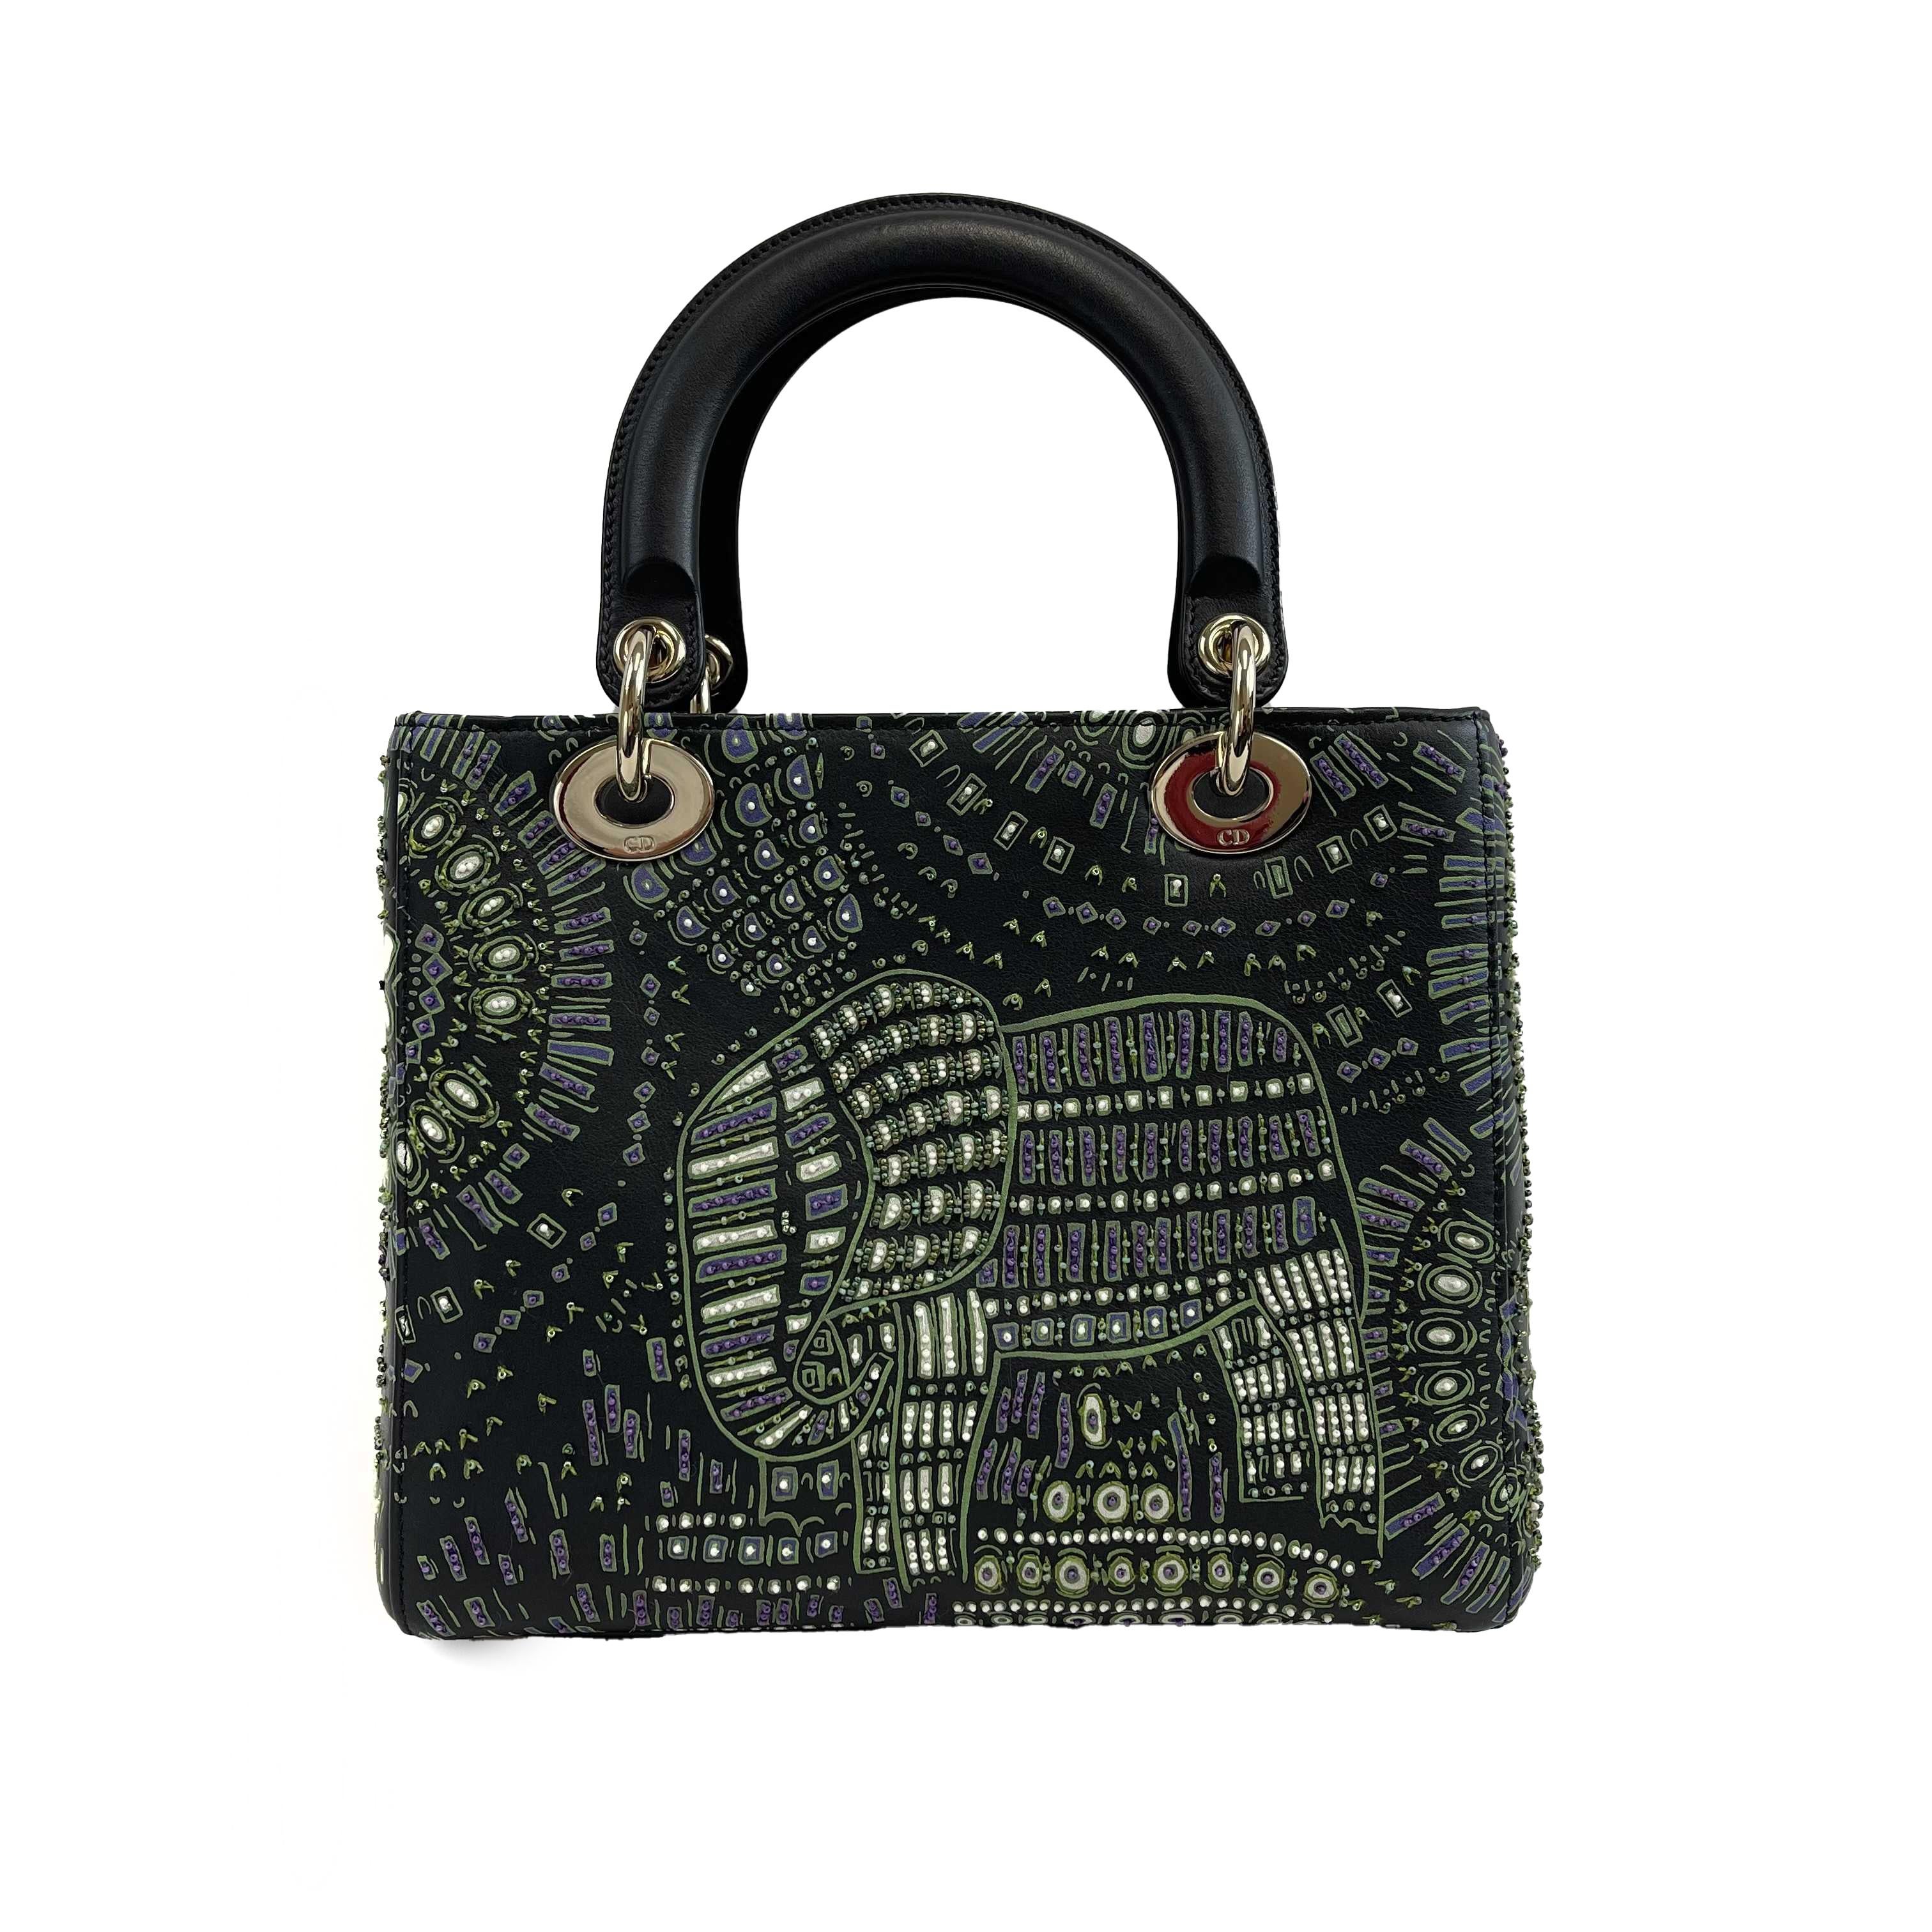 Christian Dior - Excellent - Embroidered Animals Medium Lady Dior - Black, Green, Purple - Handbag

Description

* Black leather
* Purple, white, green beading
* Double handle
* Adjustable and removable shoulder strap
* Silver hardware
* Four